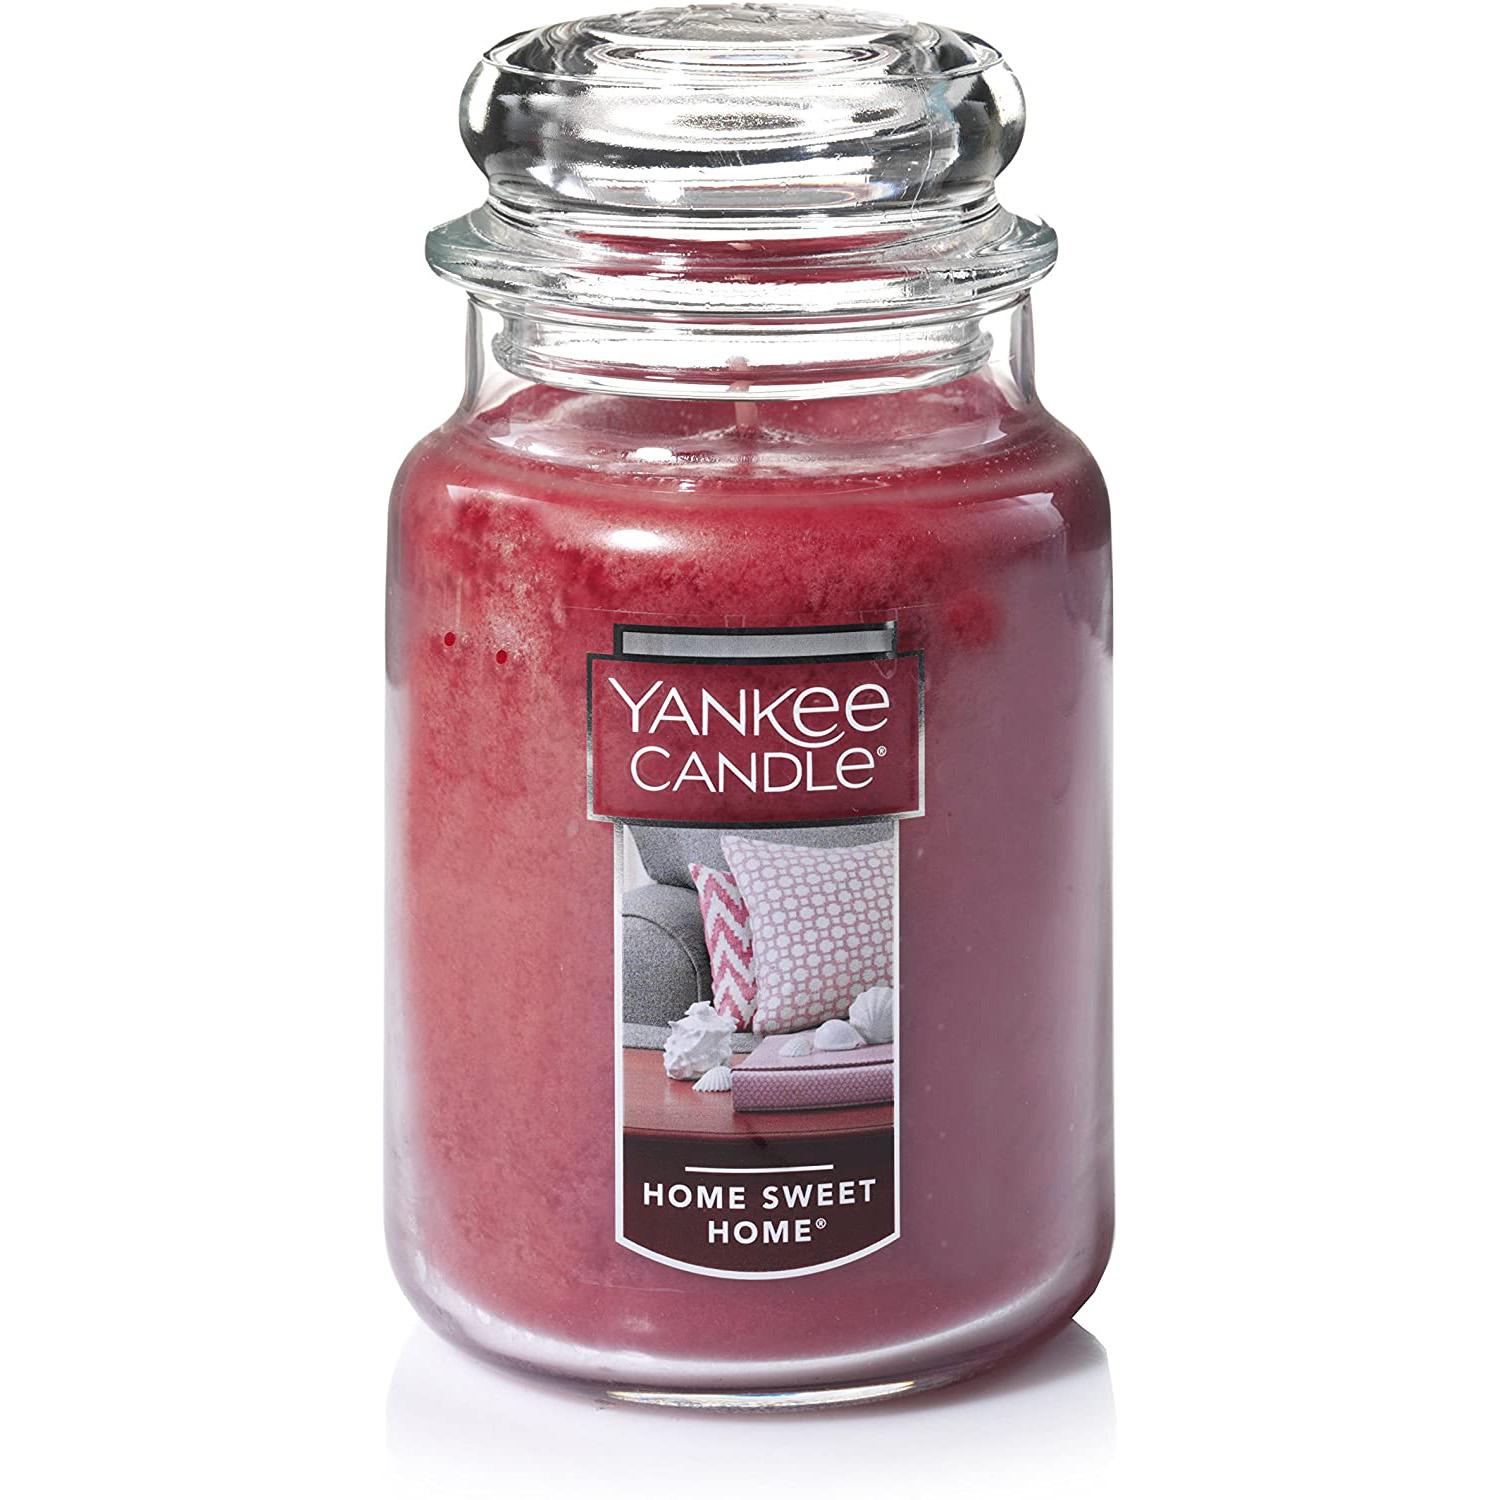 Yankee Candle Large Jar Candle Home Sweet Home for $12 Shipped